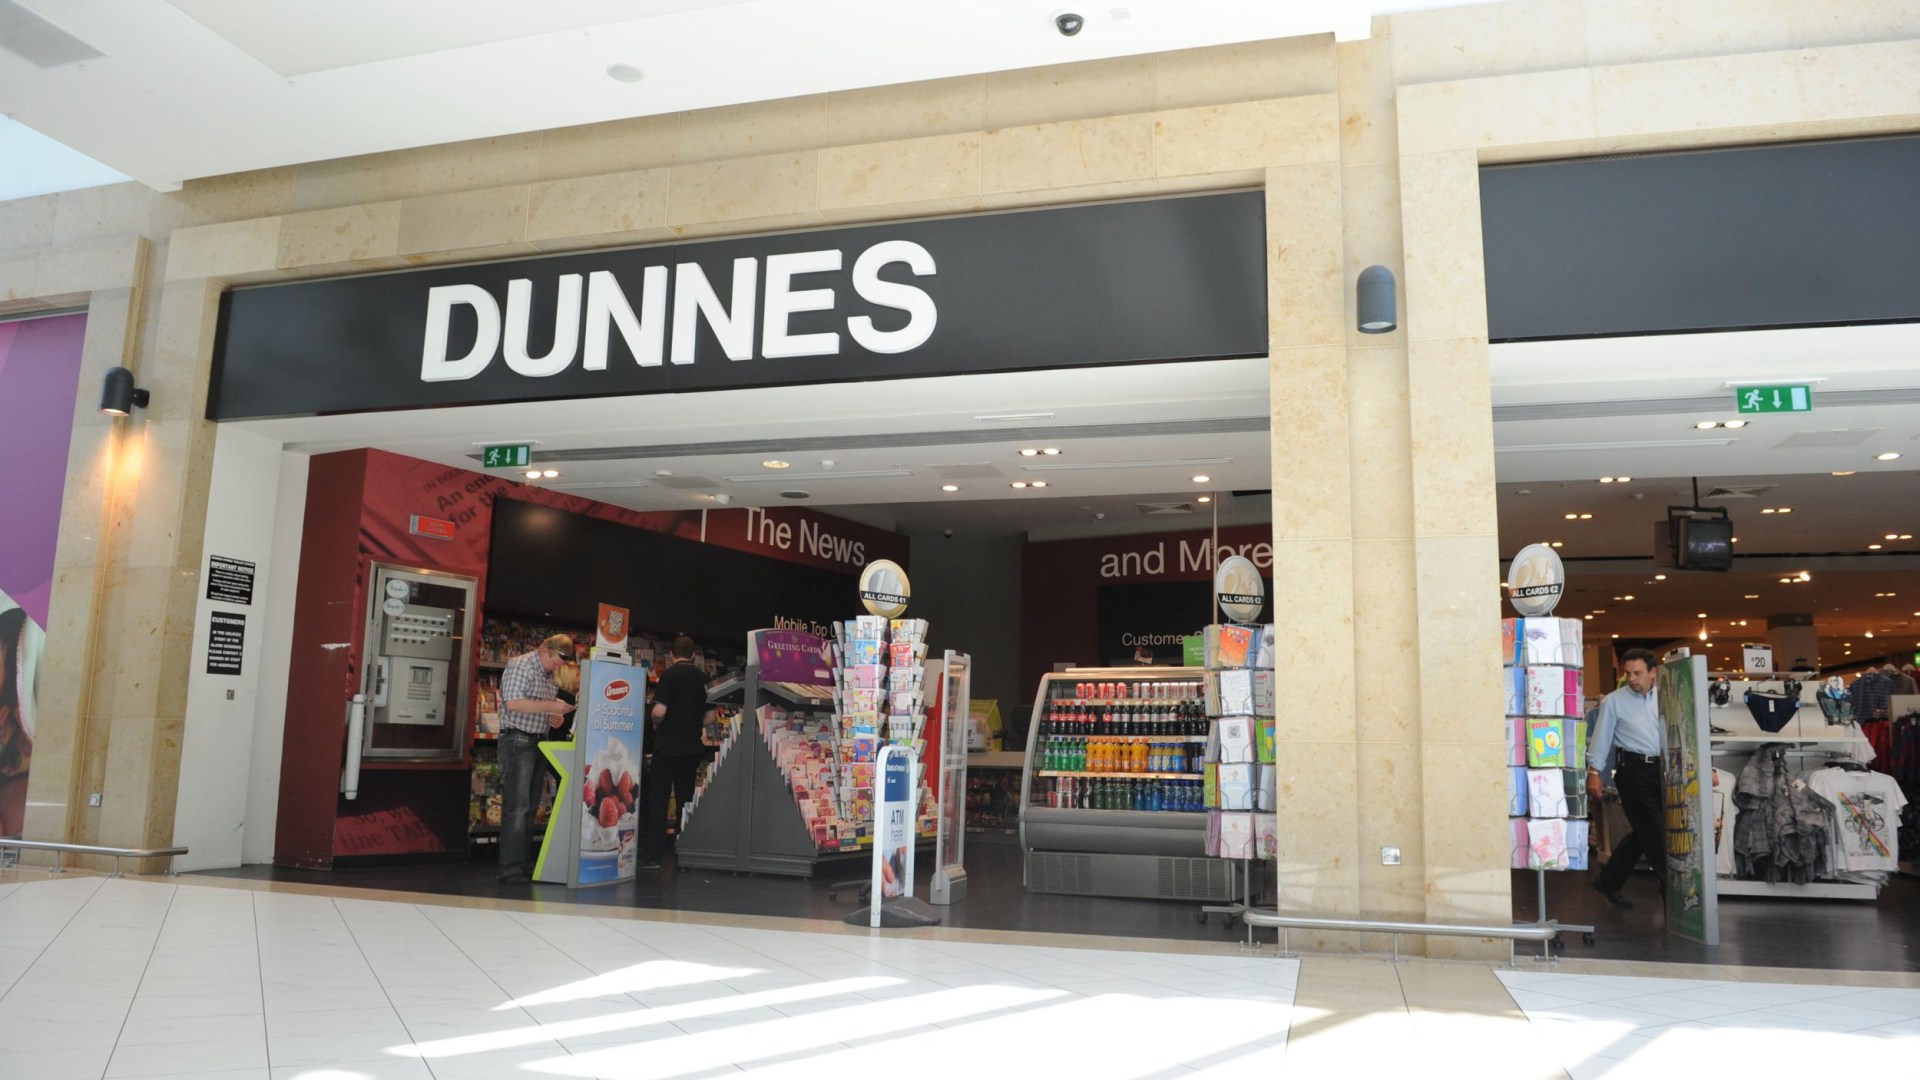 Dunnes Stores fansrushing to buy new 40 monochrome co-ord that’s perfect for the airport [Video]